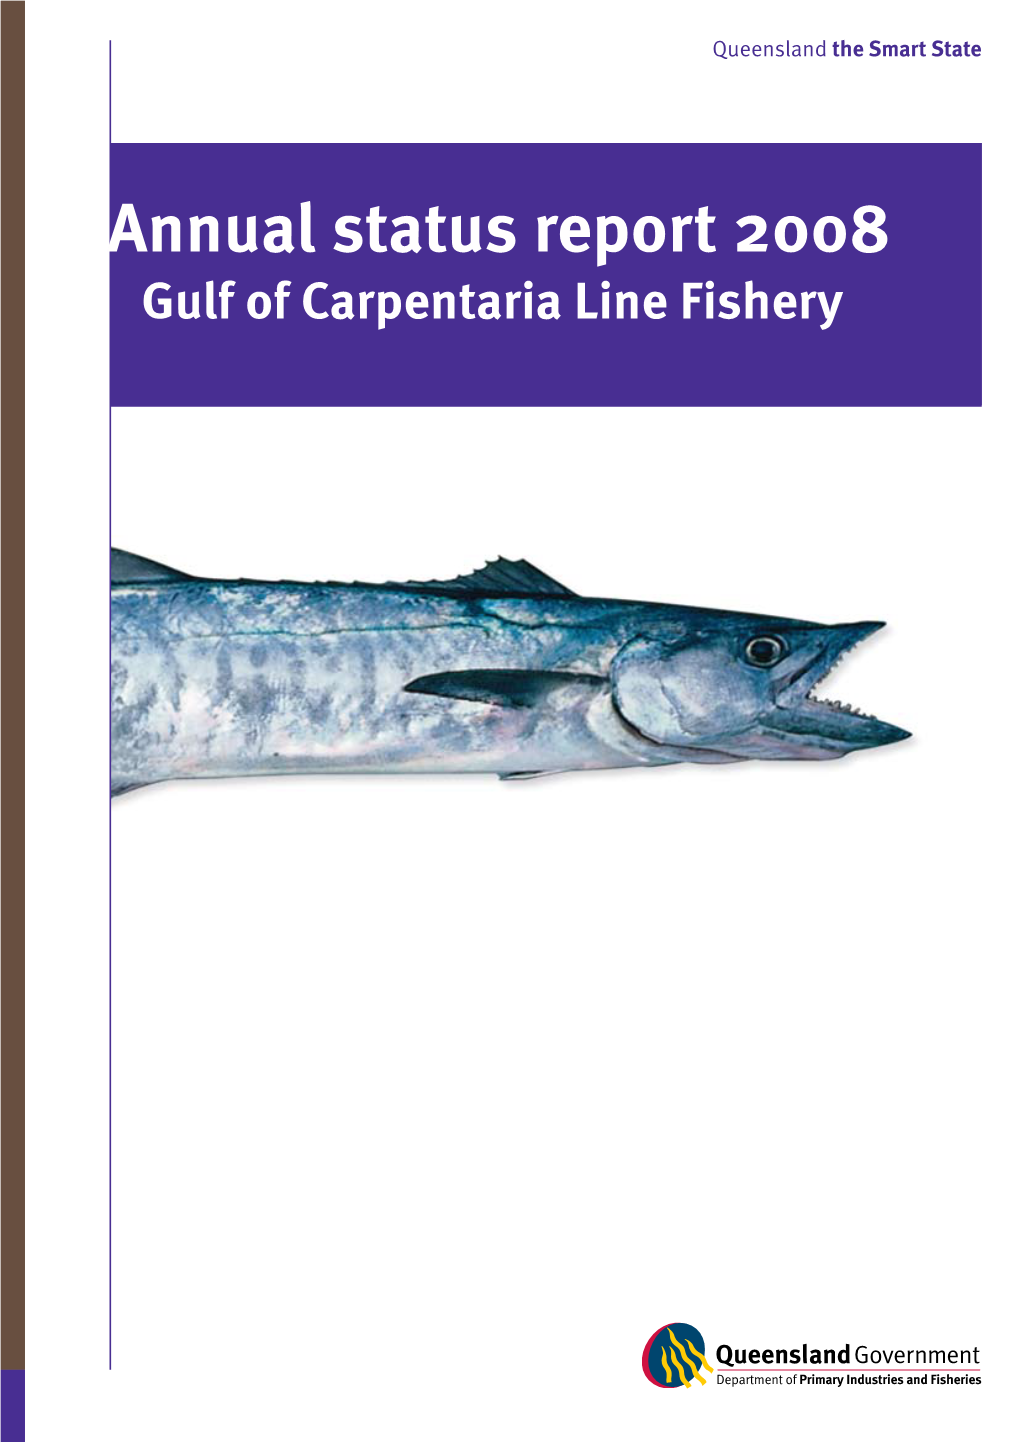 Gulf of Carpentaria Line Fishery (GOCLF) Is a Multi-Species Fishery Which Predominately Targets Spanish Mackerel (Scomberomorus Commerson) Using Surface Troll Lines